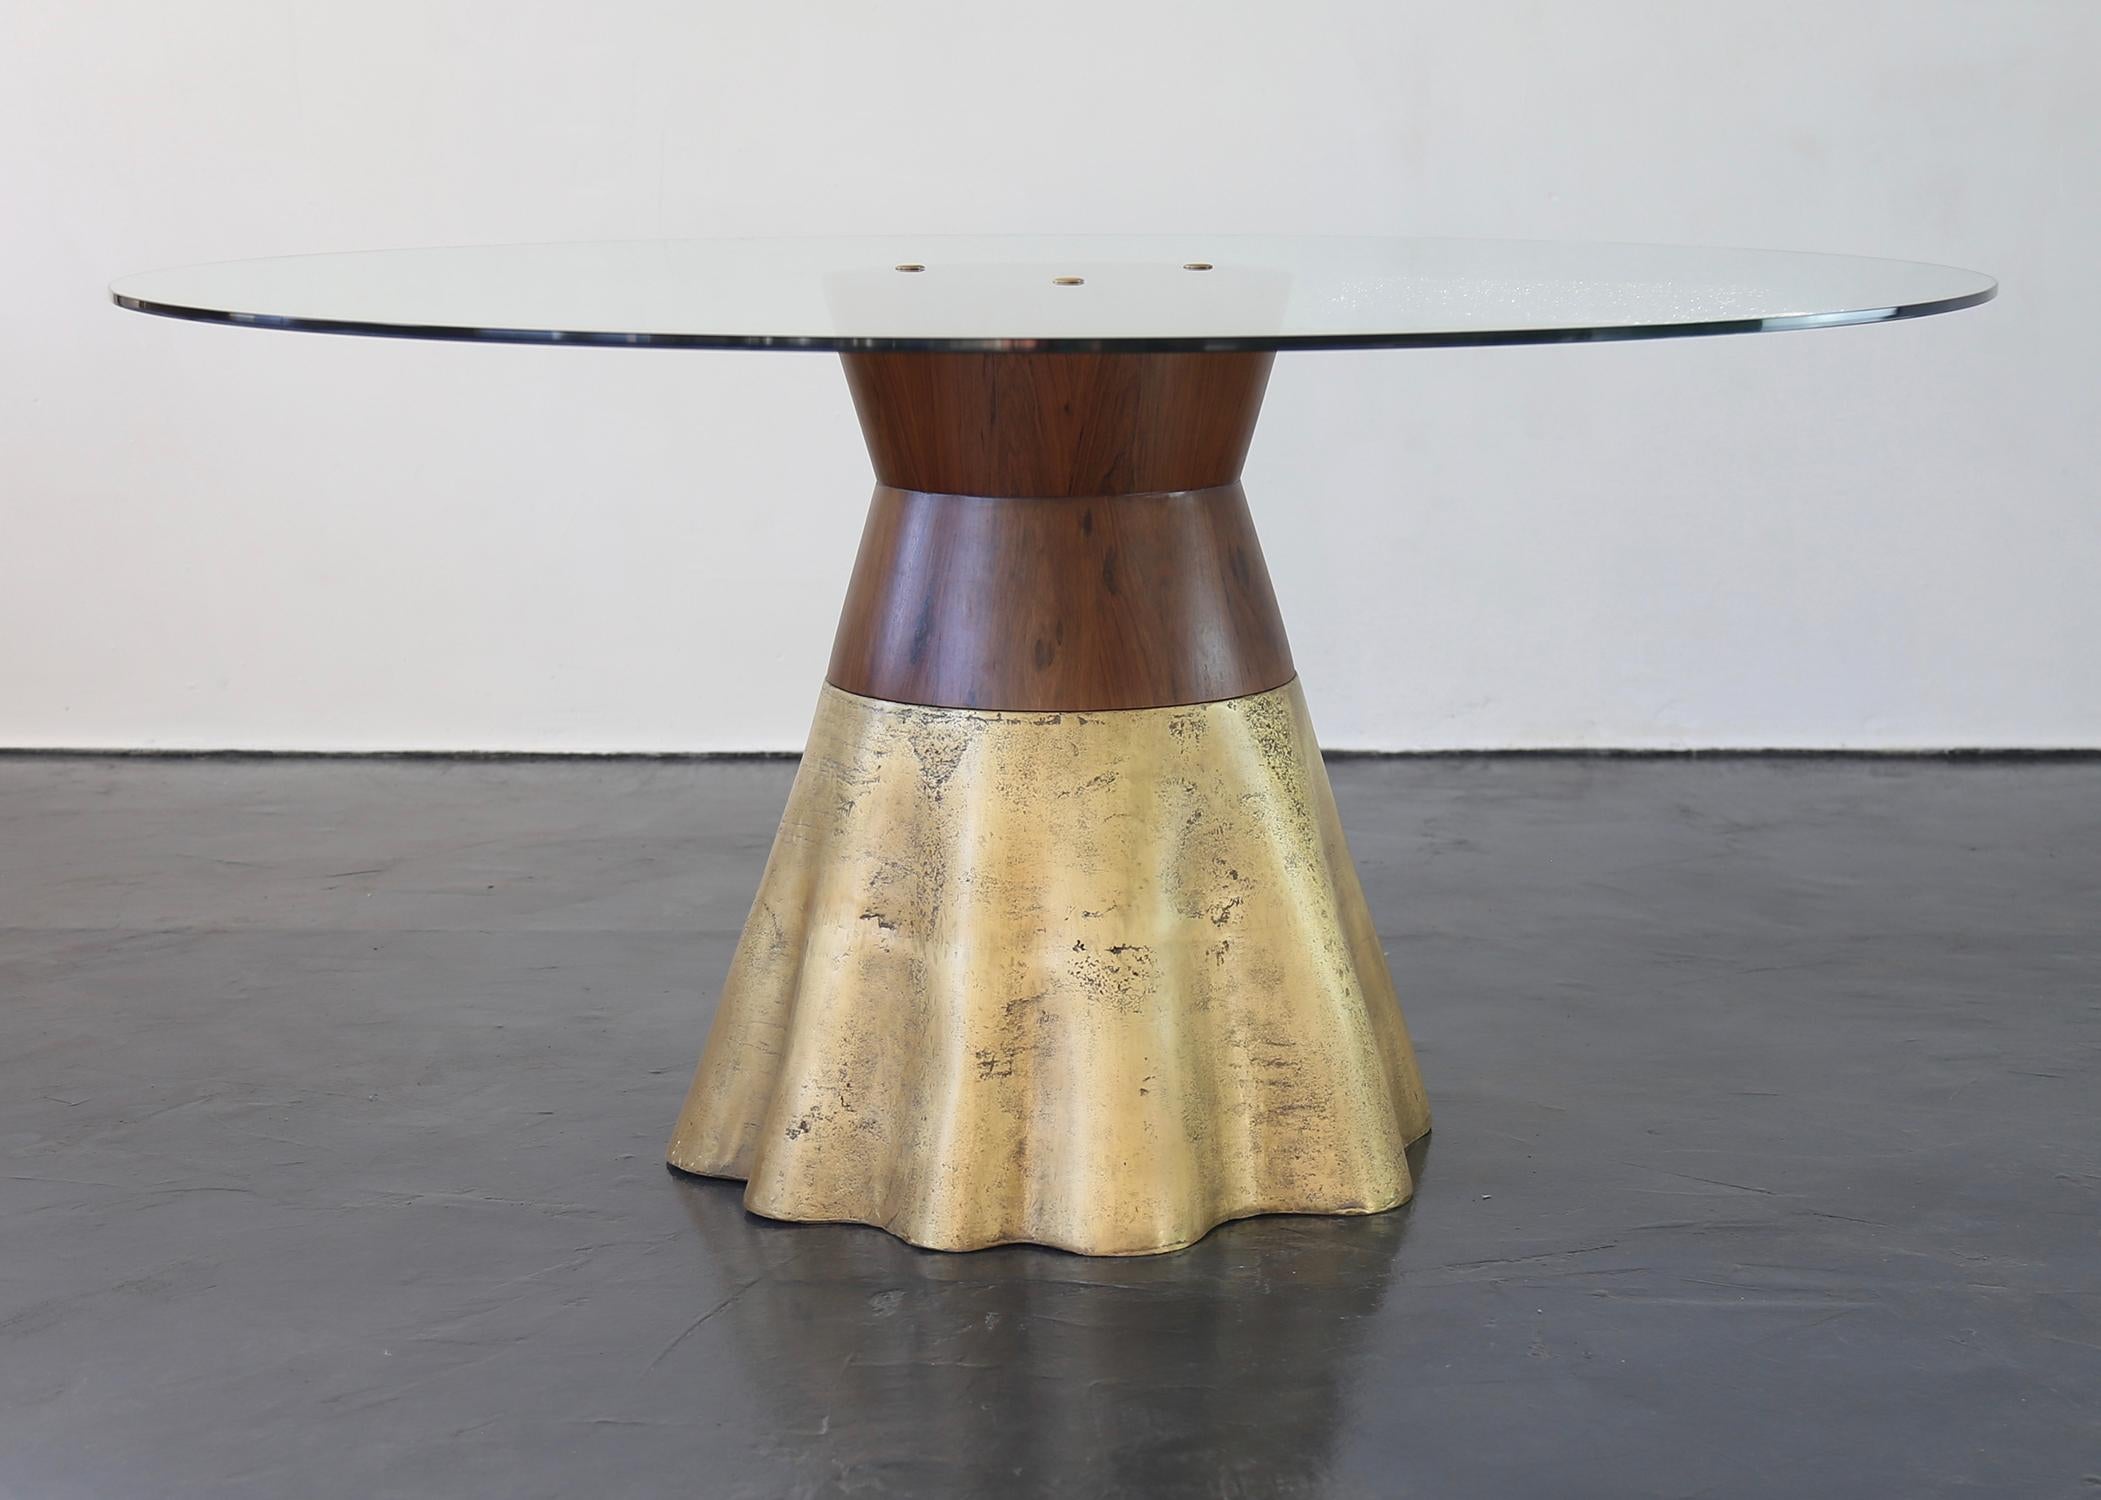 The Tavola 9 debuted at the 2009 Salone del Mobile in Milans and features an organic, wavy cast bronze base joined to a rigid, conical wood support.   Only partially polished to show the evidence of the burnt earth that once surrounded the bronze,